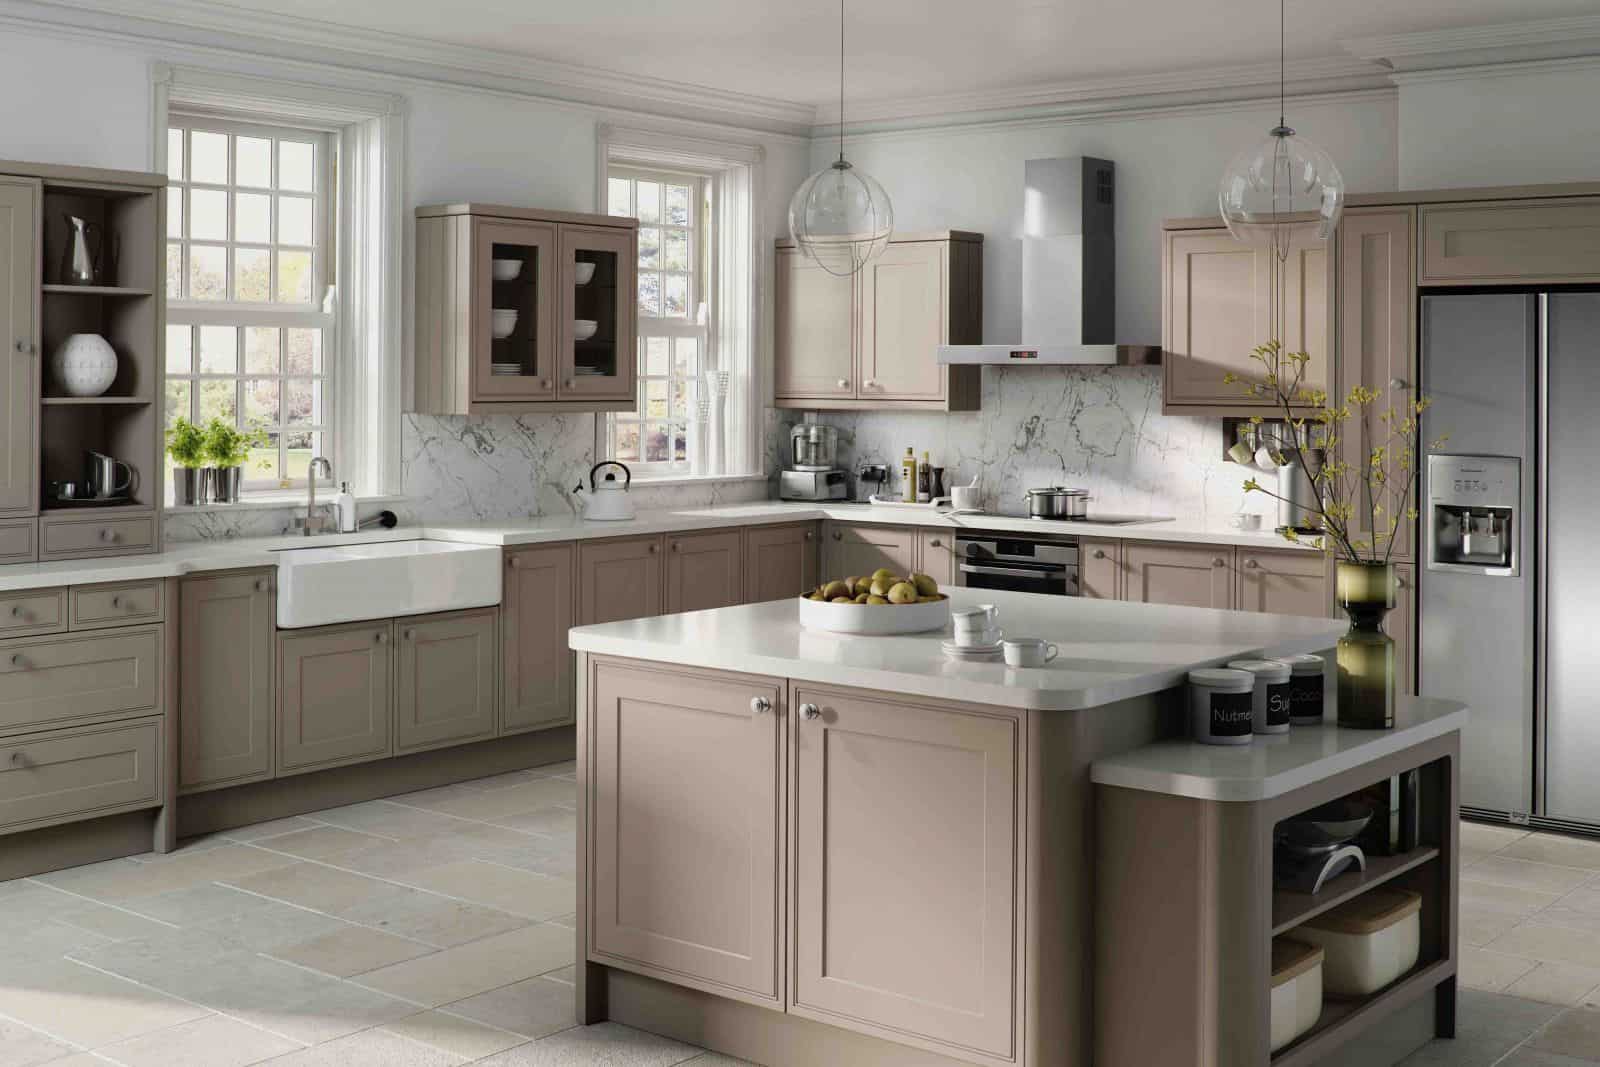 Top Taupe Paints for Your Kitchen Cabinets